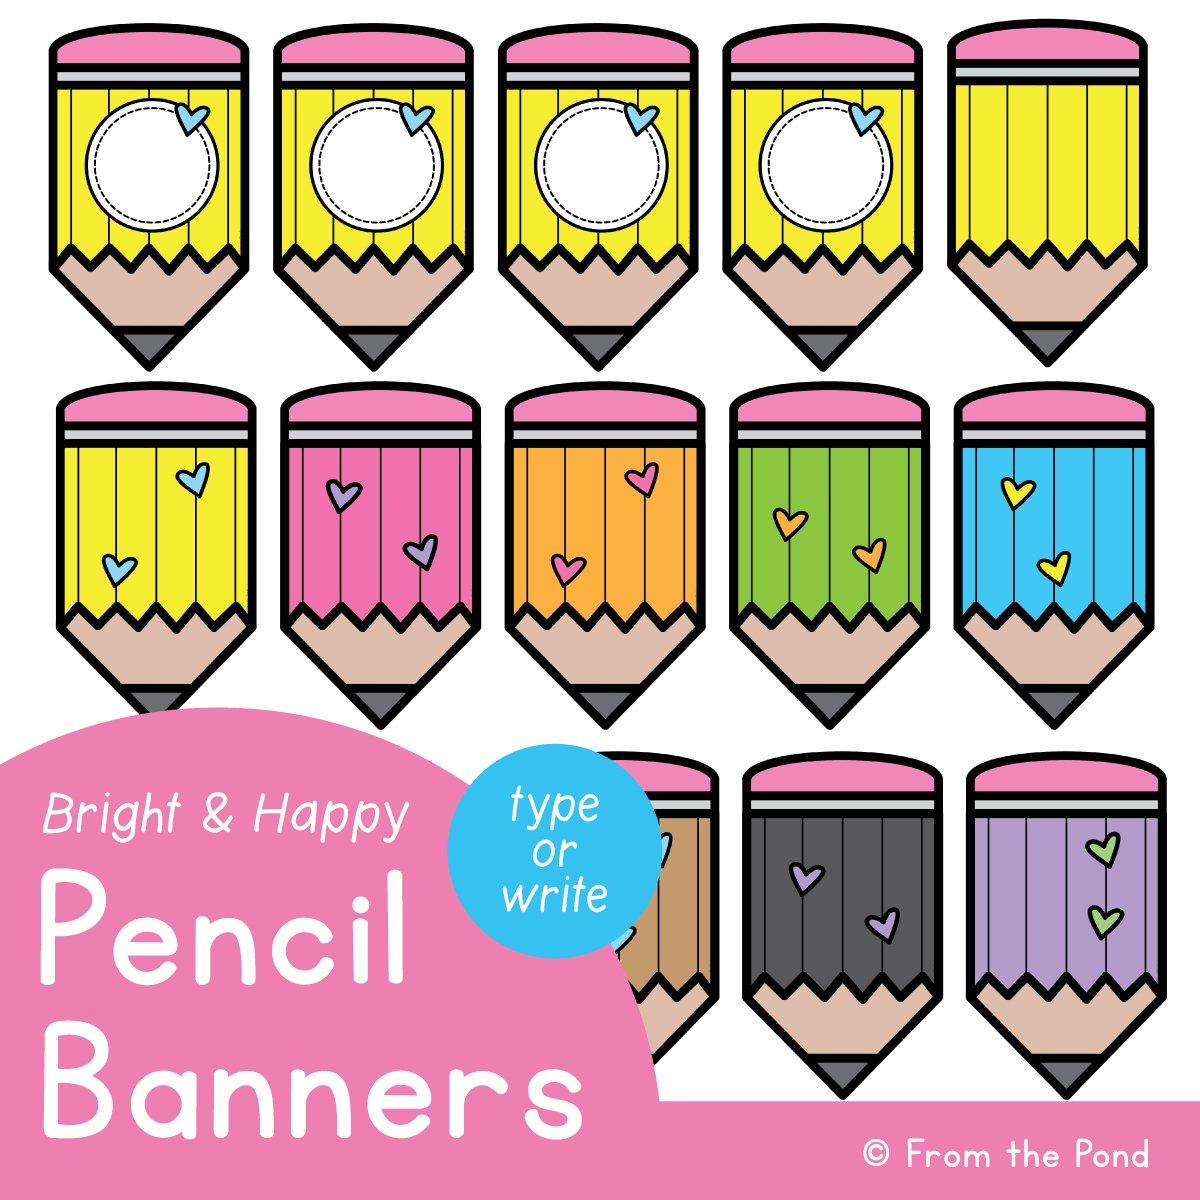 Pencil Banners